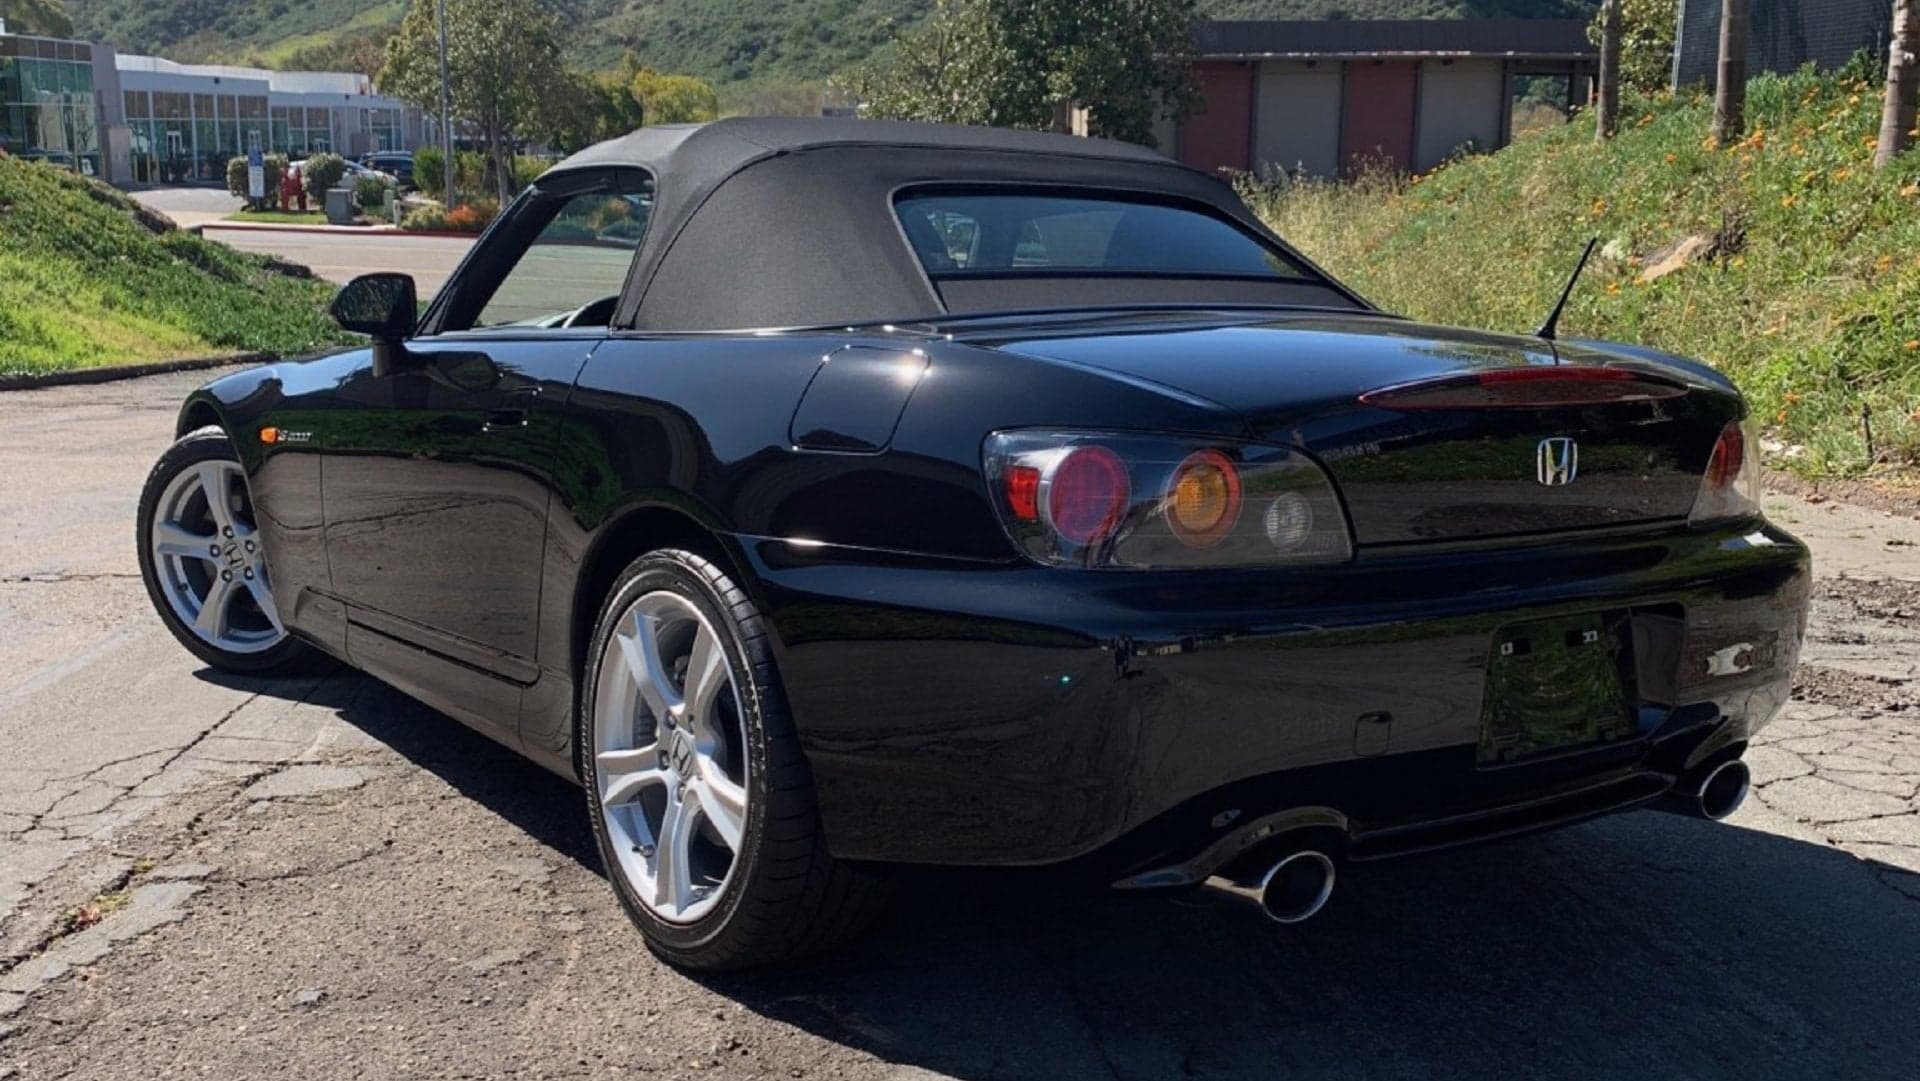 Graham Rahal’s 2009 Honda S2000 With Only 91 Miles Just Sold for an Insane $70,000